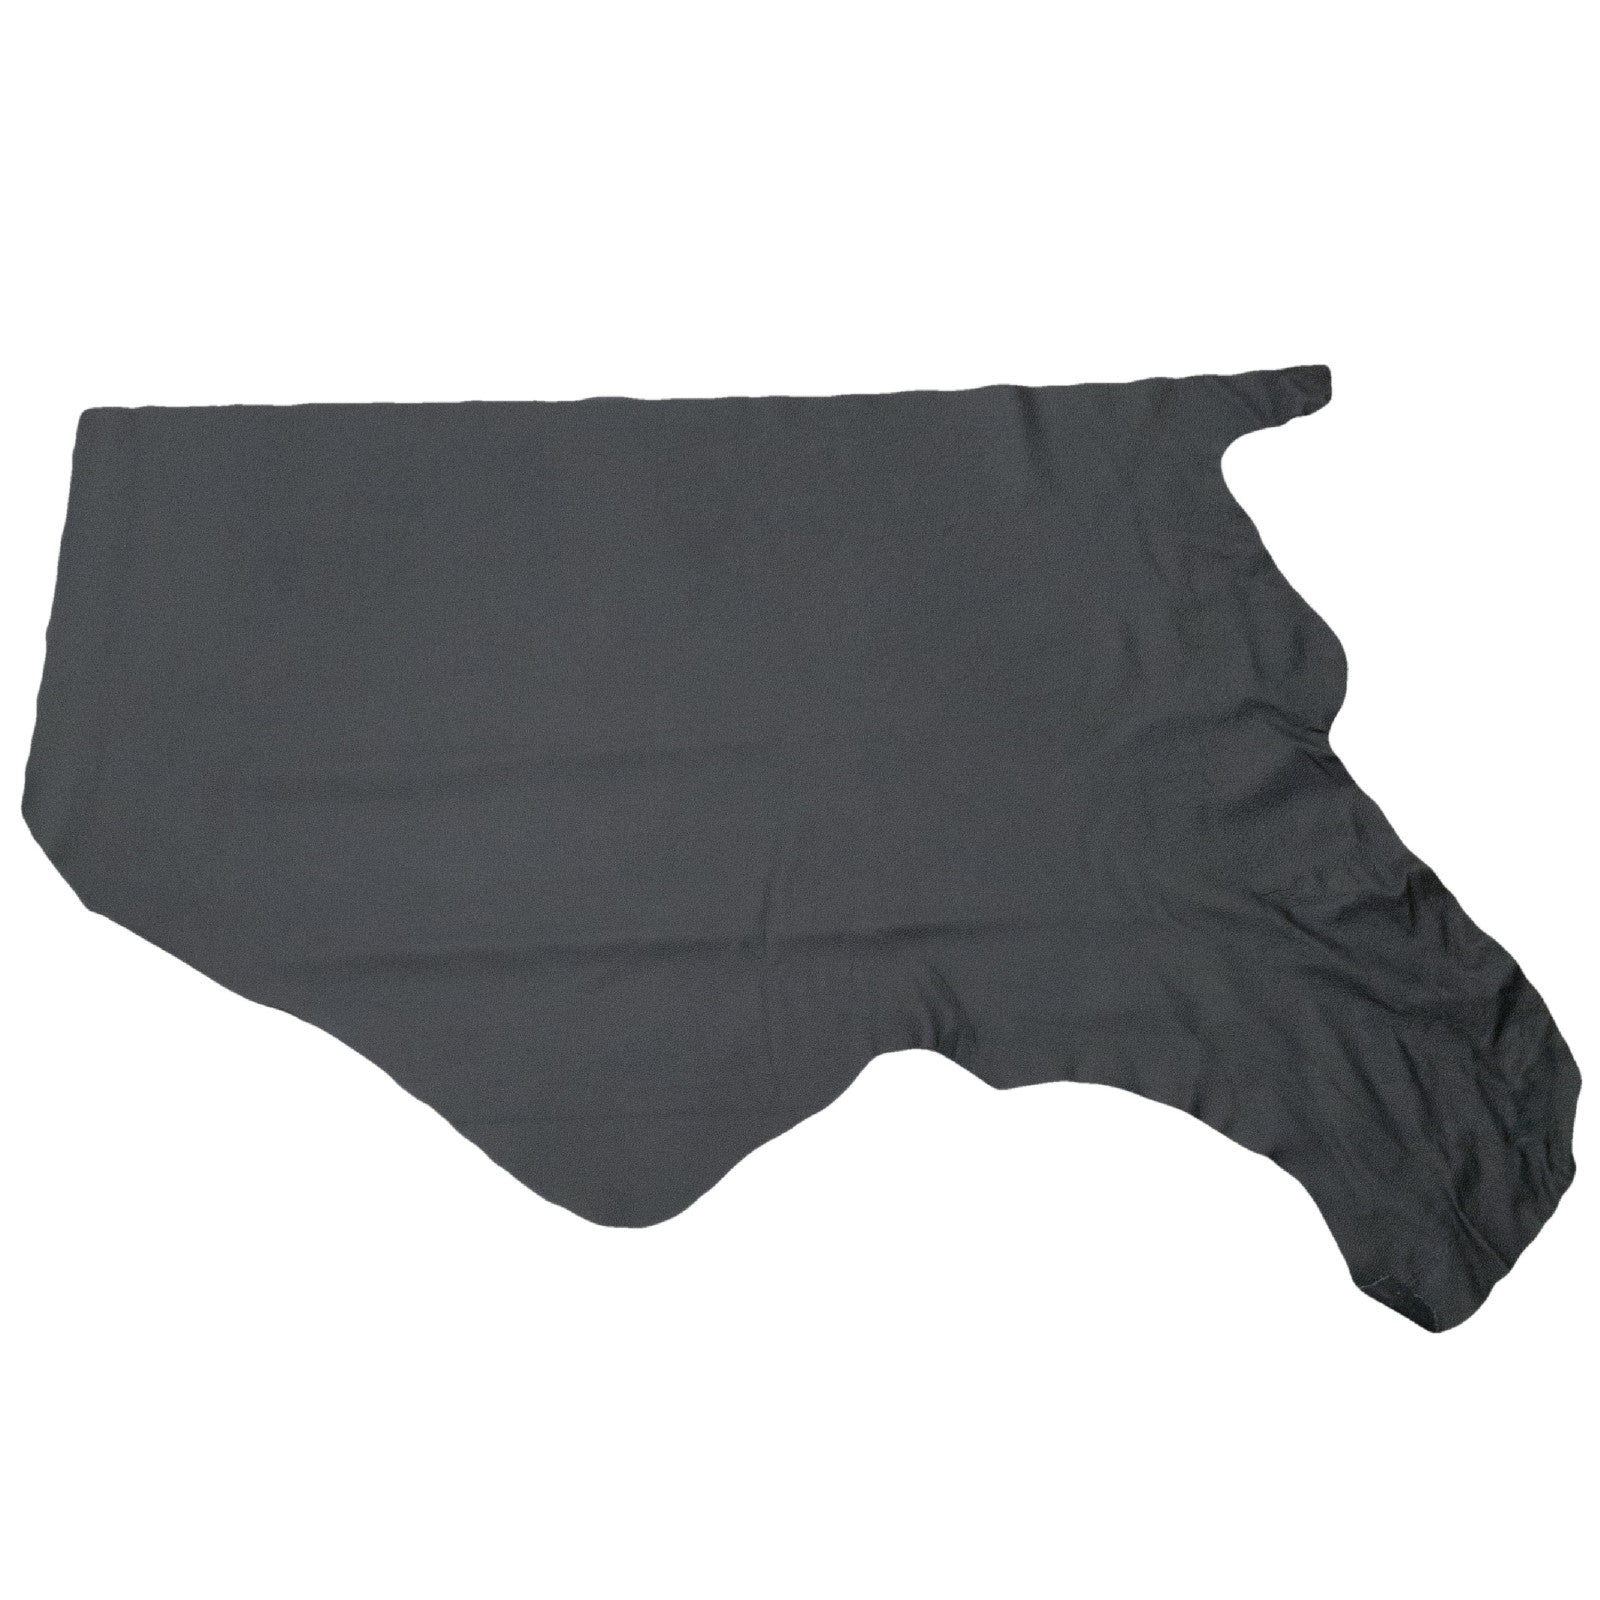 Classic Black, 5.5-20 Sq Ft, 2.5-3 oz Cow Hides, Vital Upholstery Collection, Bottom Piece / 5.5-6.5 | The Leather Guy